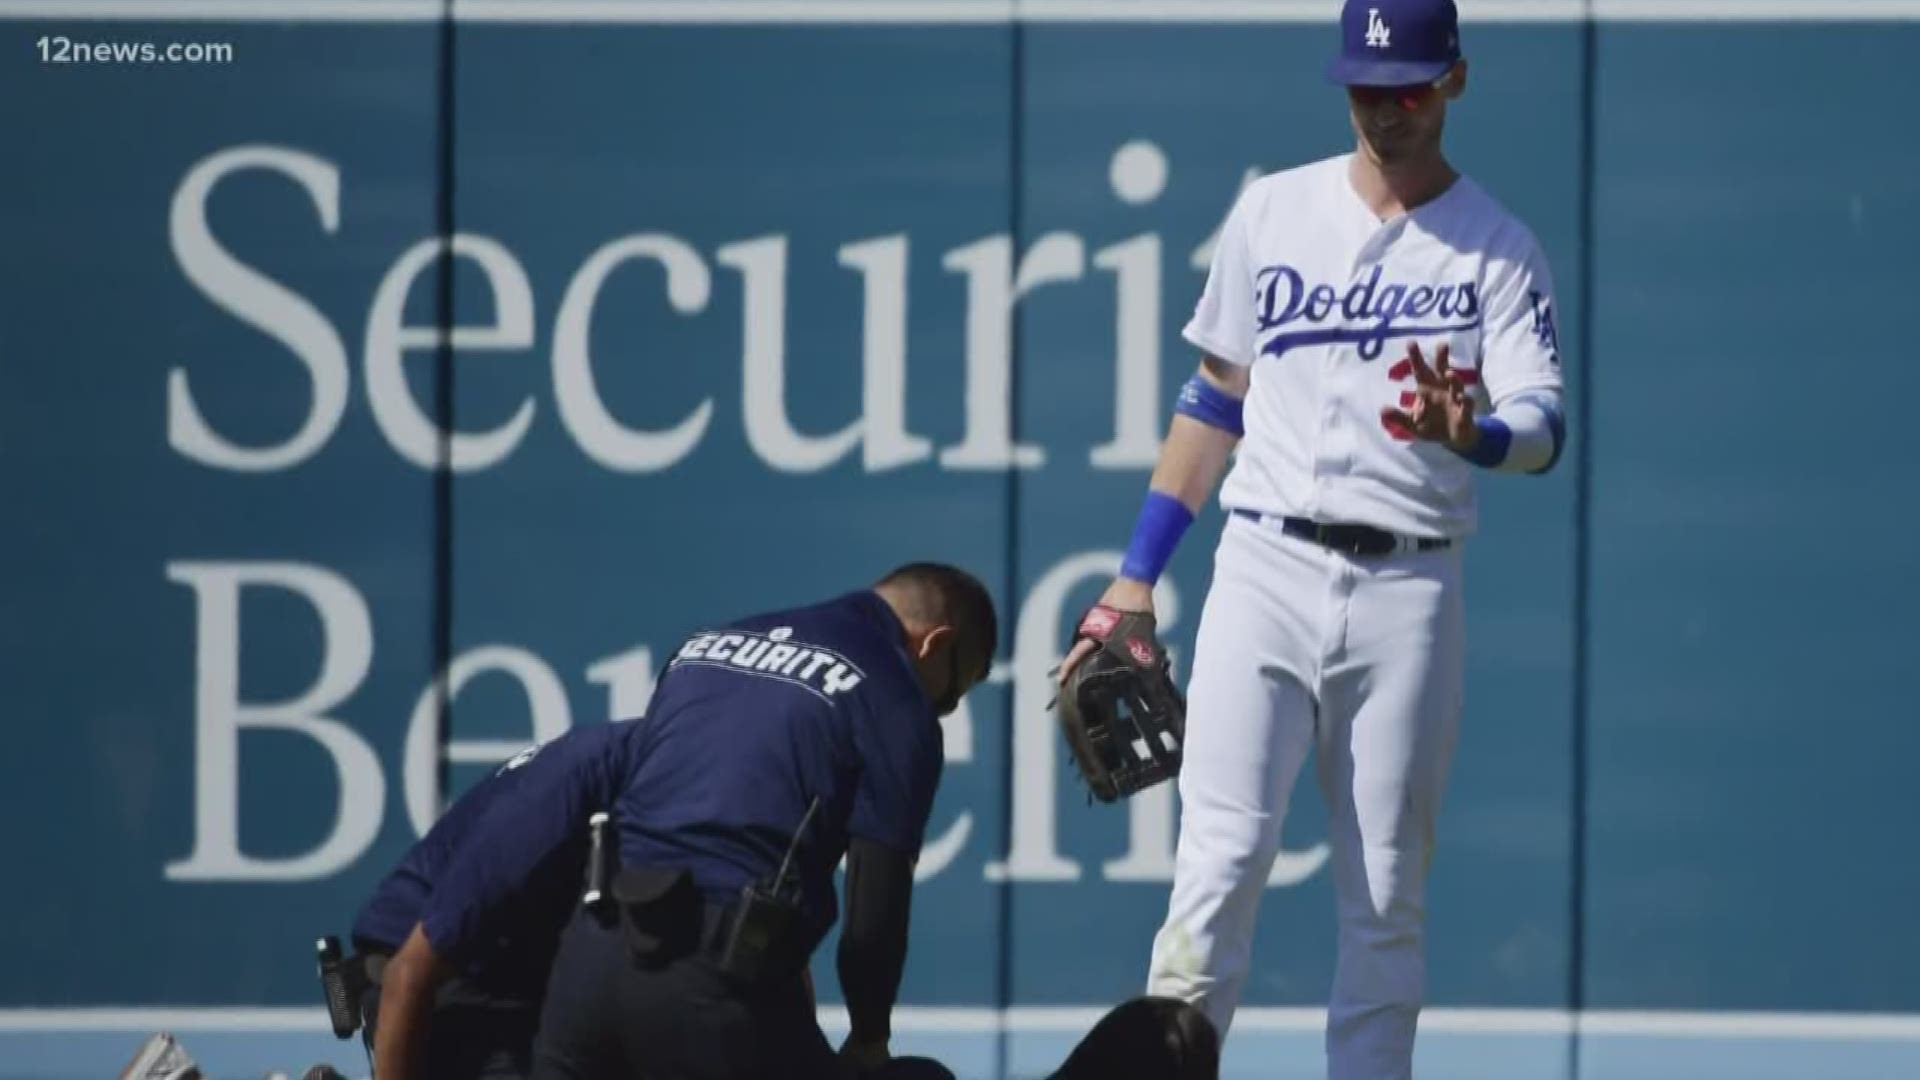 Cody Bellinger says he's not a good hugger, wants girls to stop